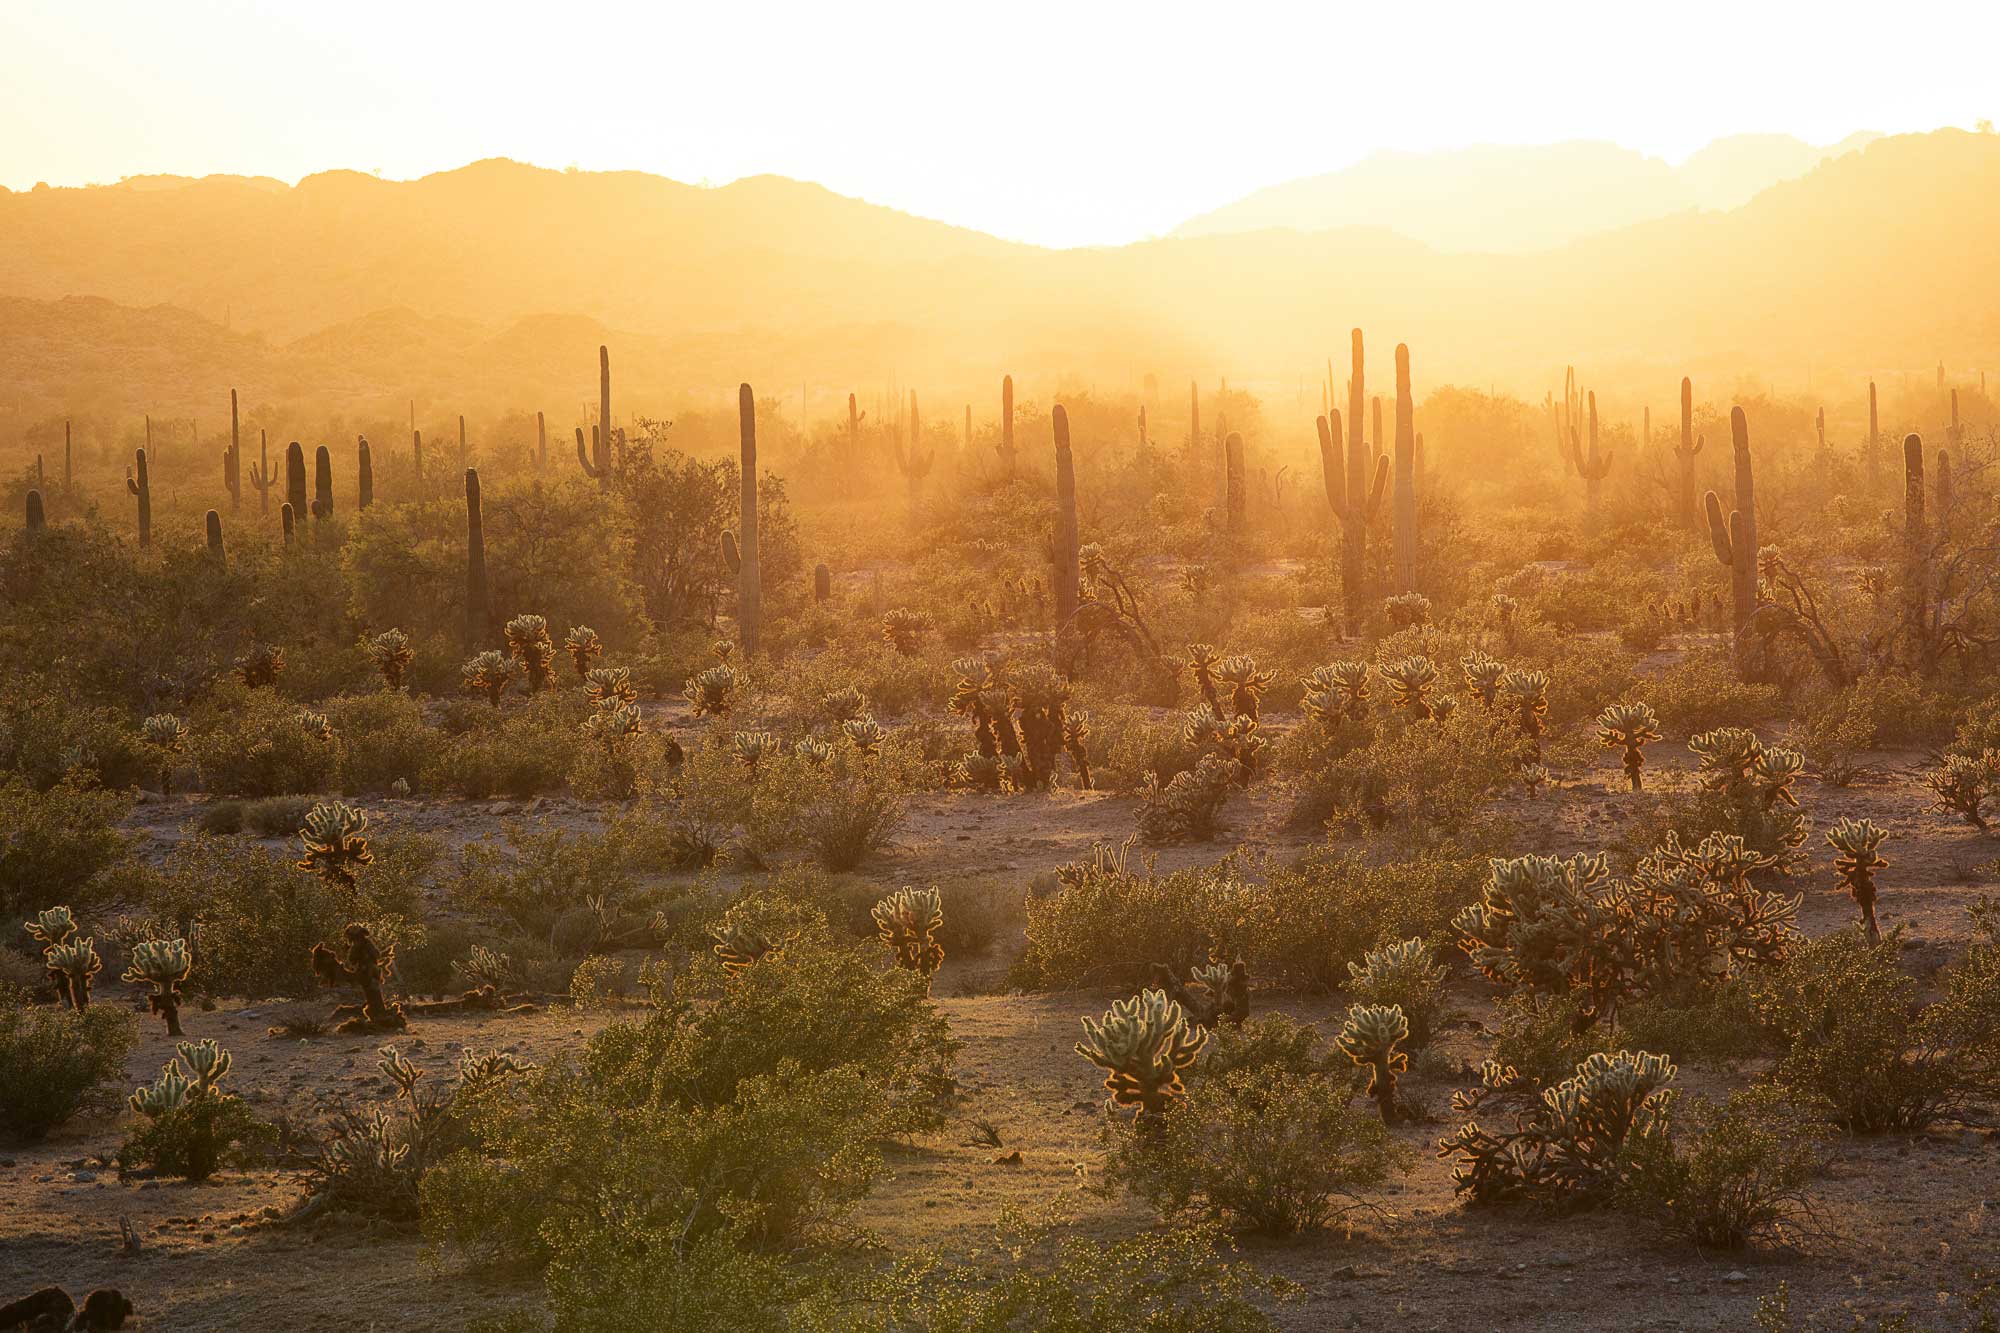 Photograph of the Sonoran Desert in Arizona. The photo shows the sun just over a low mountain range, flooding the landscape with yellow to orange sunlight. In the foreground, branch saguaro cacti, short, highly branched cholla cacti, and shrubs dot the arid landscape.